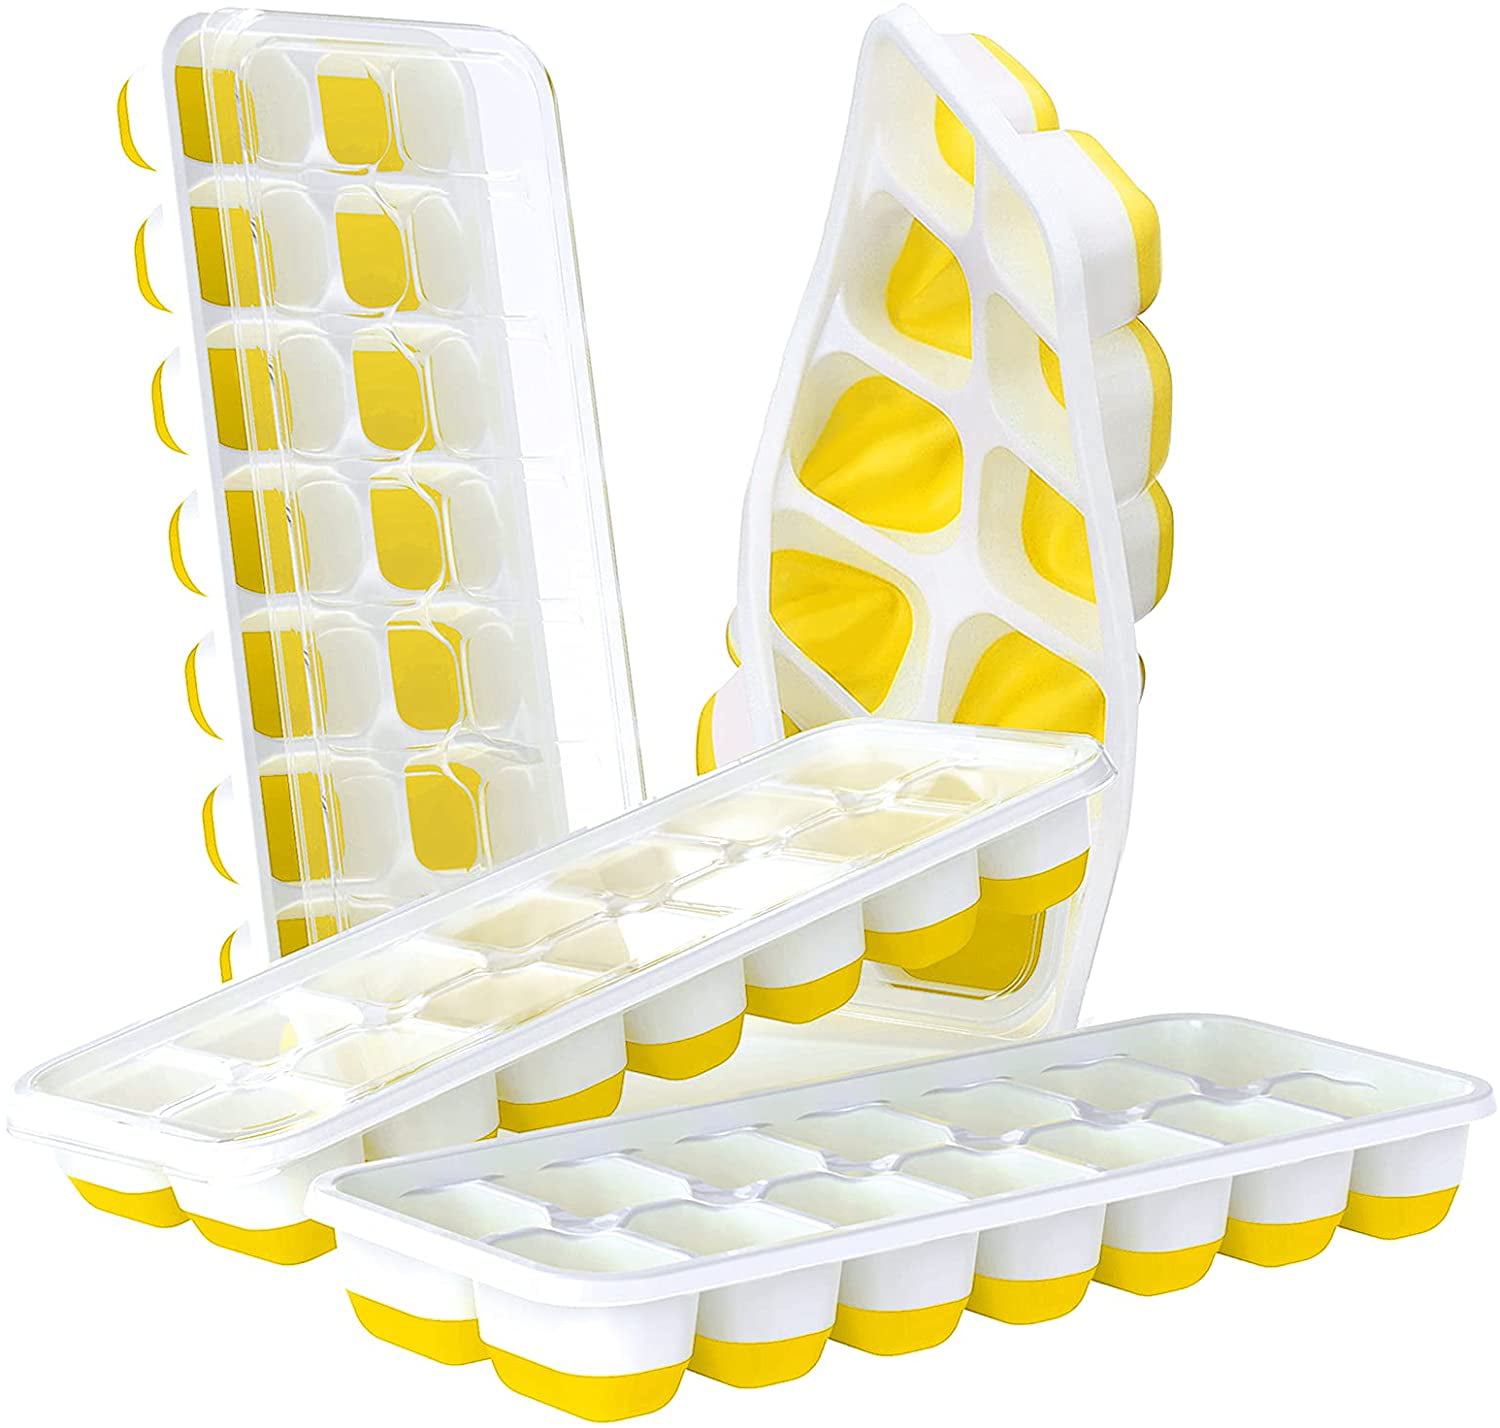 Easy-Release Silicone and Flexible 14-Ice Trays with Spill-Resistant Removable Lid LFGB Certified & BPA Free Stackable OMorc Ice Cube Trays 4 Pack 